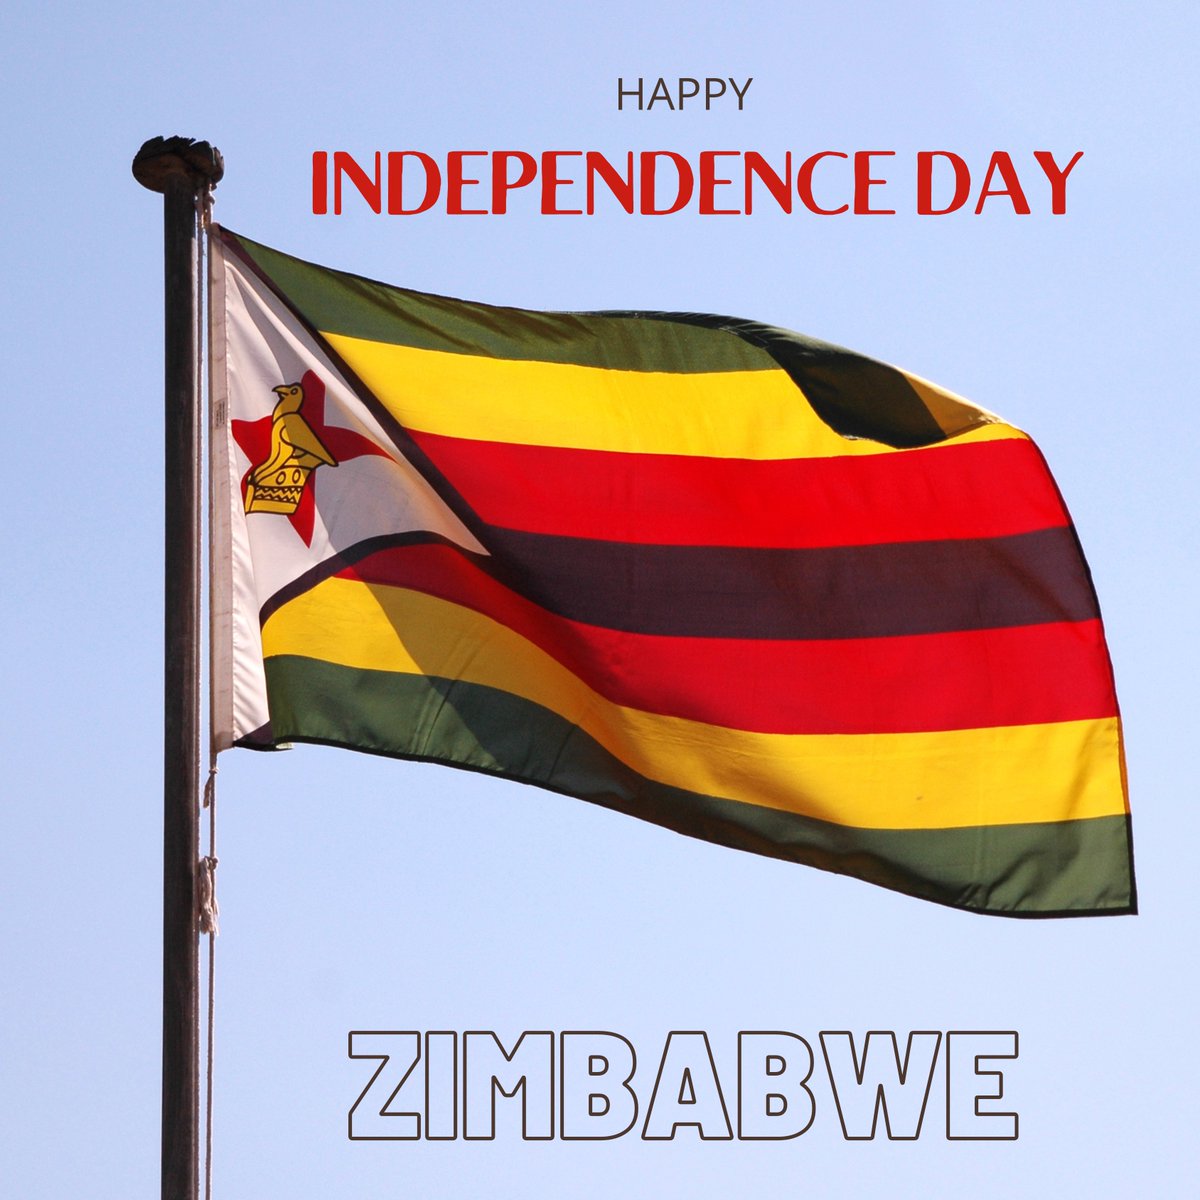 On April 18, 1980, Zimbabwe, or Southern Rhodesia (1898) and Rhodesia (1965), gained independence with Robert Mugabe as its PM before becoming president in 1987 until 2017. 

Happy independence to the people of Zimbabwe!
𝒰𝓃𝒾𝓉𝓎, 𝐹𝓇𝑒𝑒𝒹𝑜𝓂, 𝒲𝑜𝓇𝓀!
#ZimbabweAt44